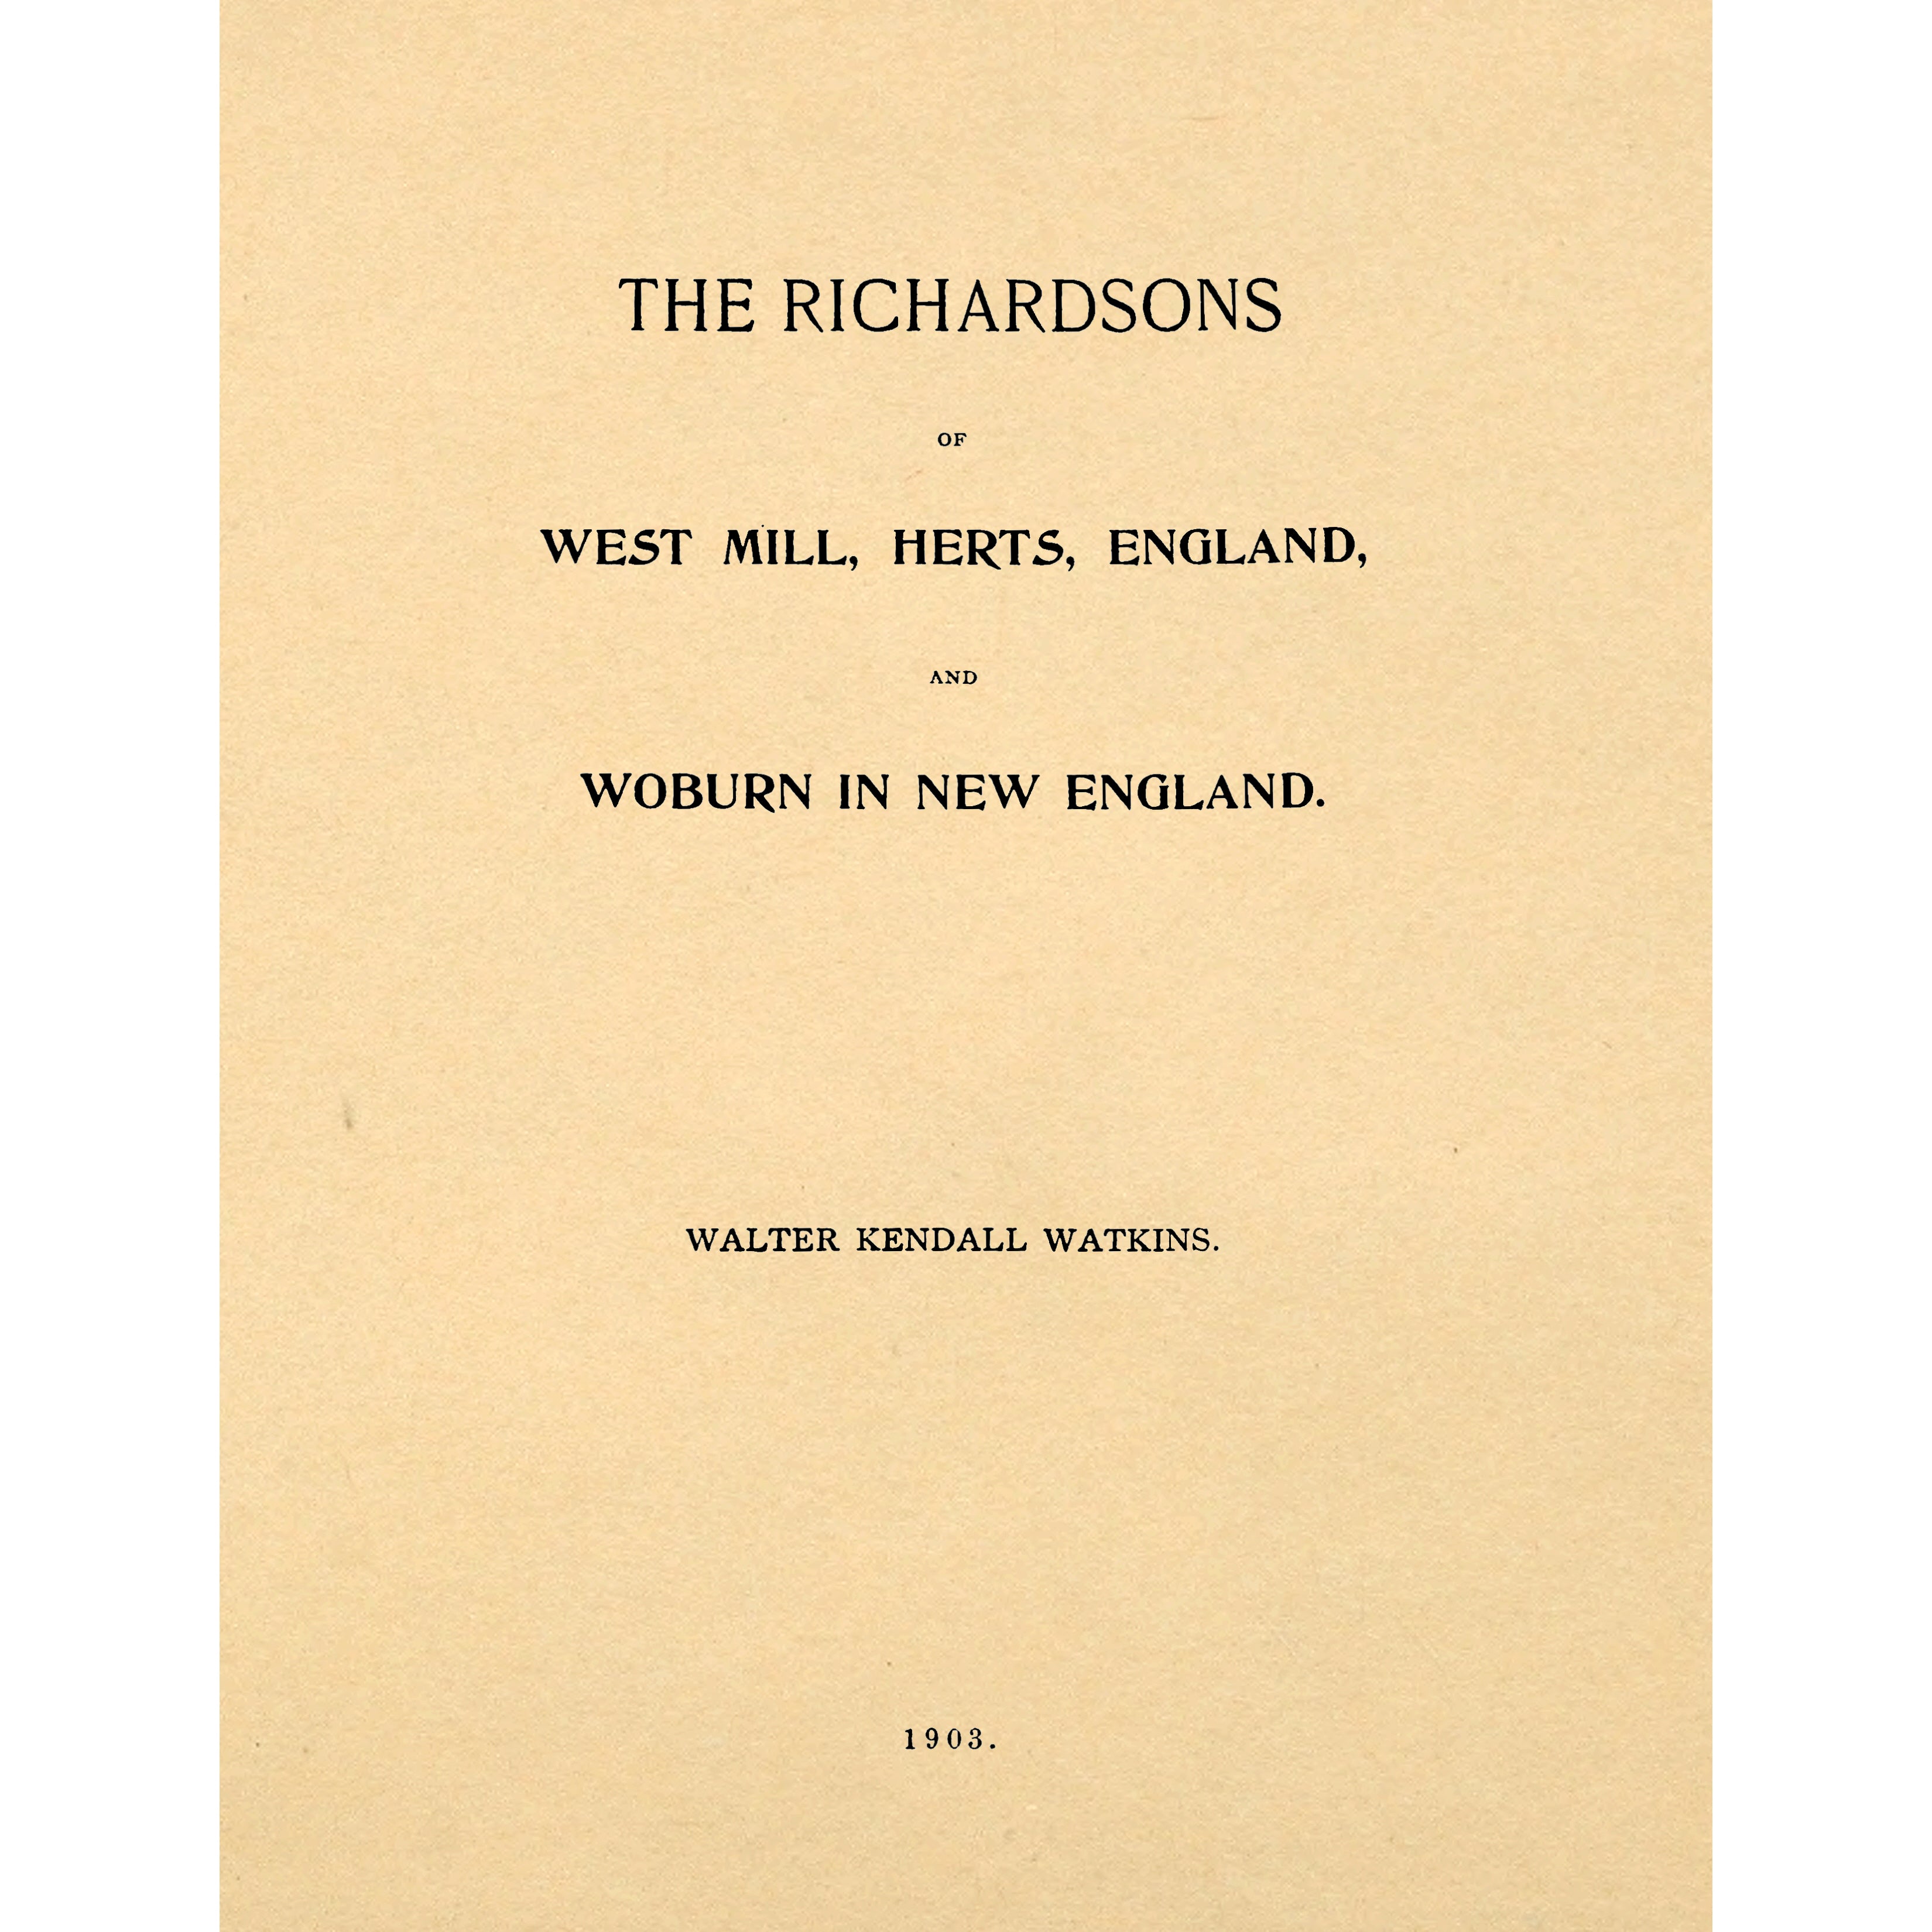 The Richardsons of West Mill, Herts, England, and Woburn in New England